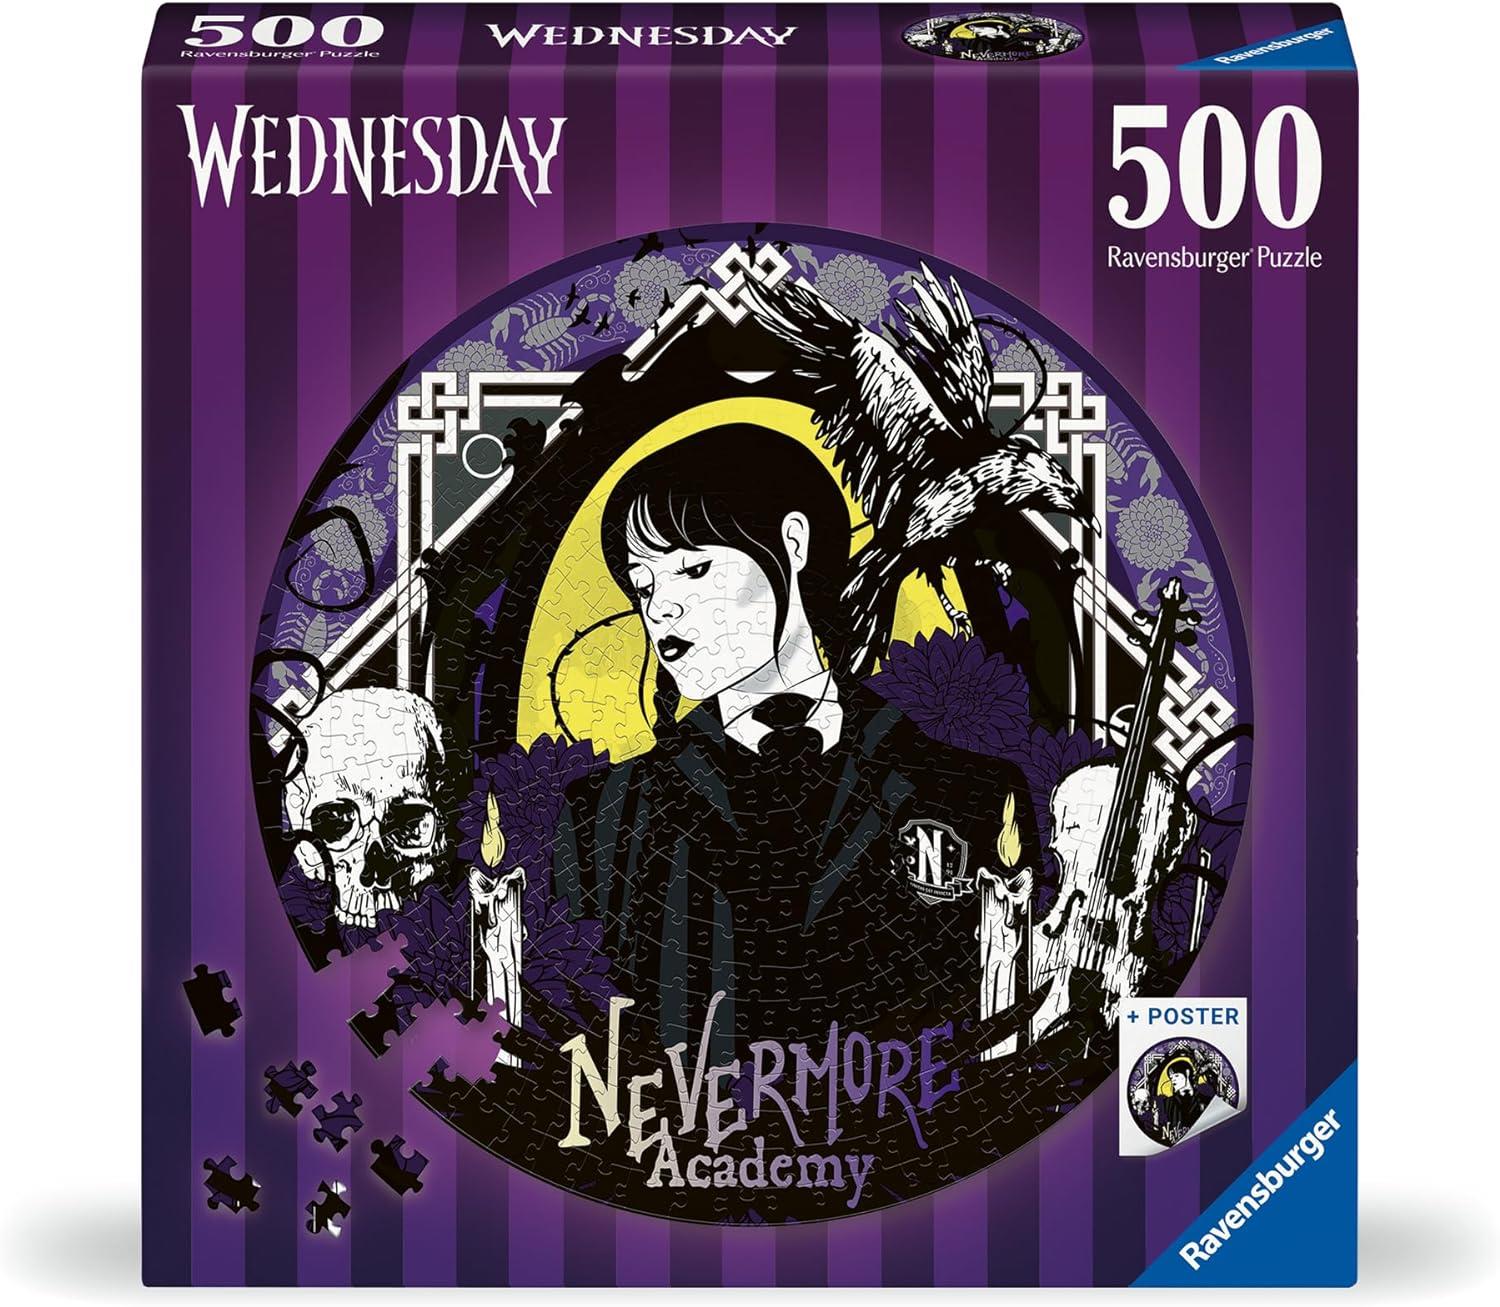 Ravensburger Wednesday, Nevermore Academy Jigsaw Puzzle (500 Pieces)